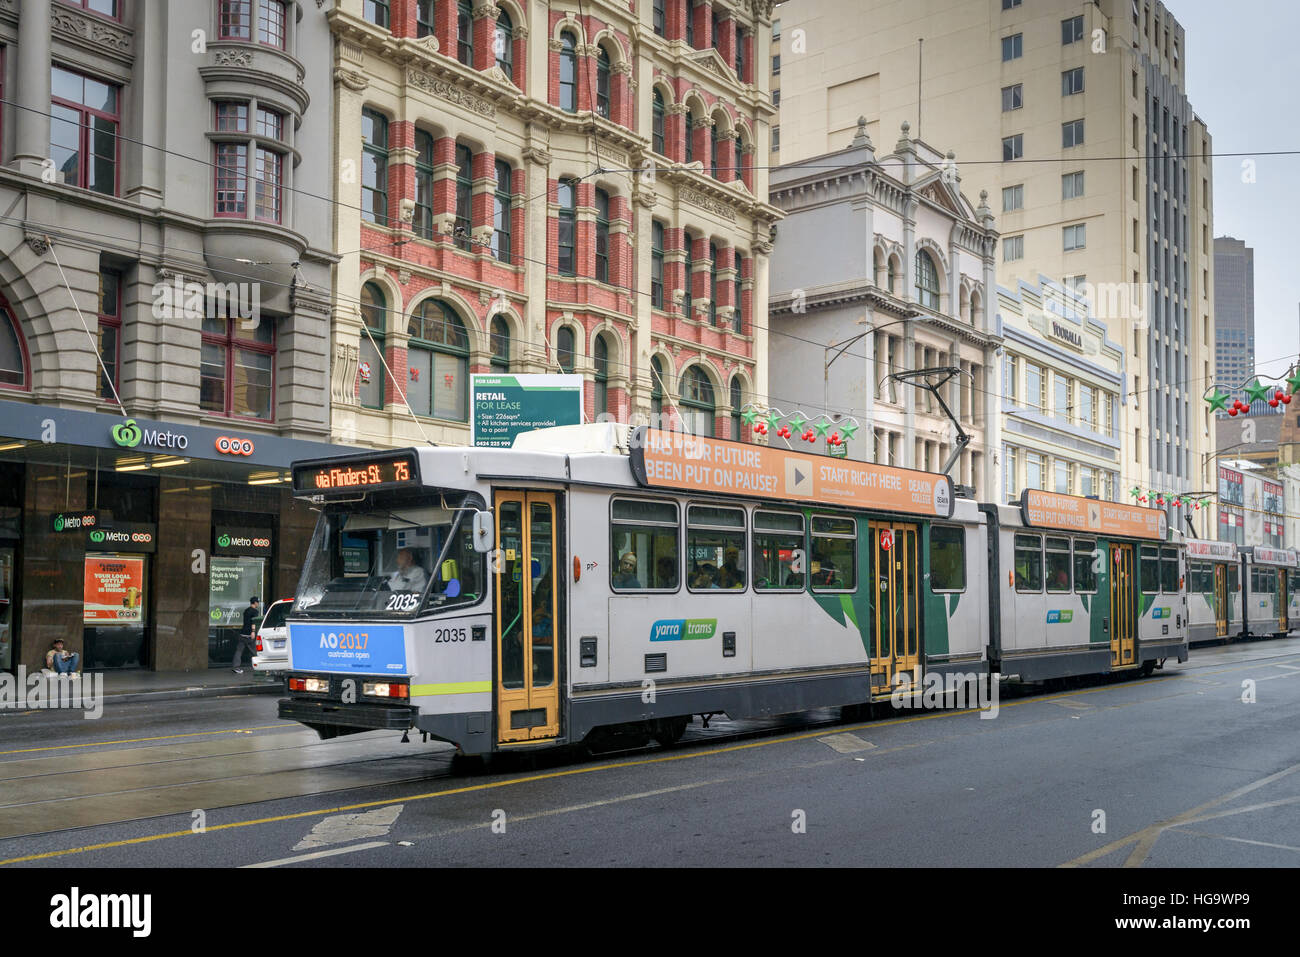 Melbourne, Australia - December 27, 2016: Melbourne City Tram at Flinders Street. The service is the most famous iconic transportation in the state. Stock Photo